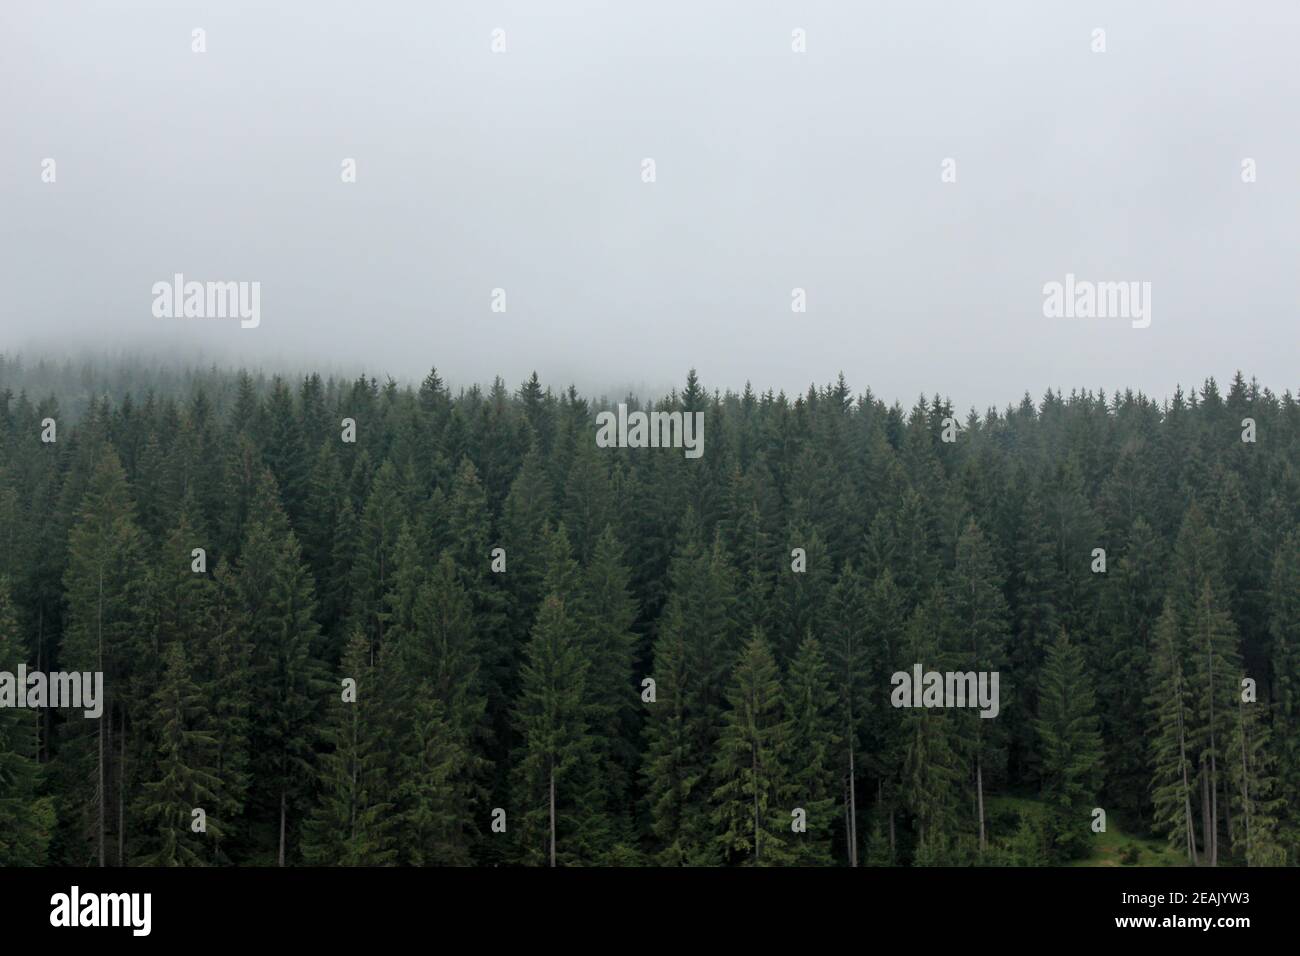 Forest of pine trees with hazy weather Stock Photo